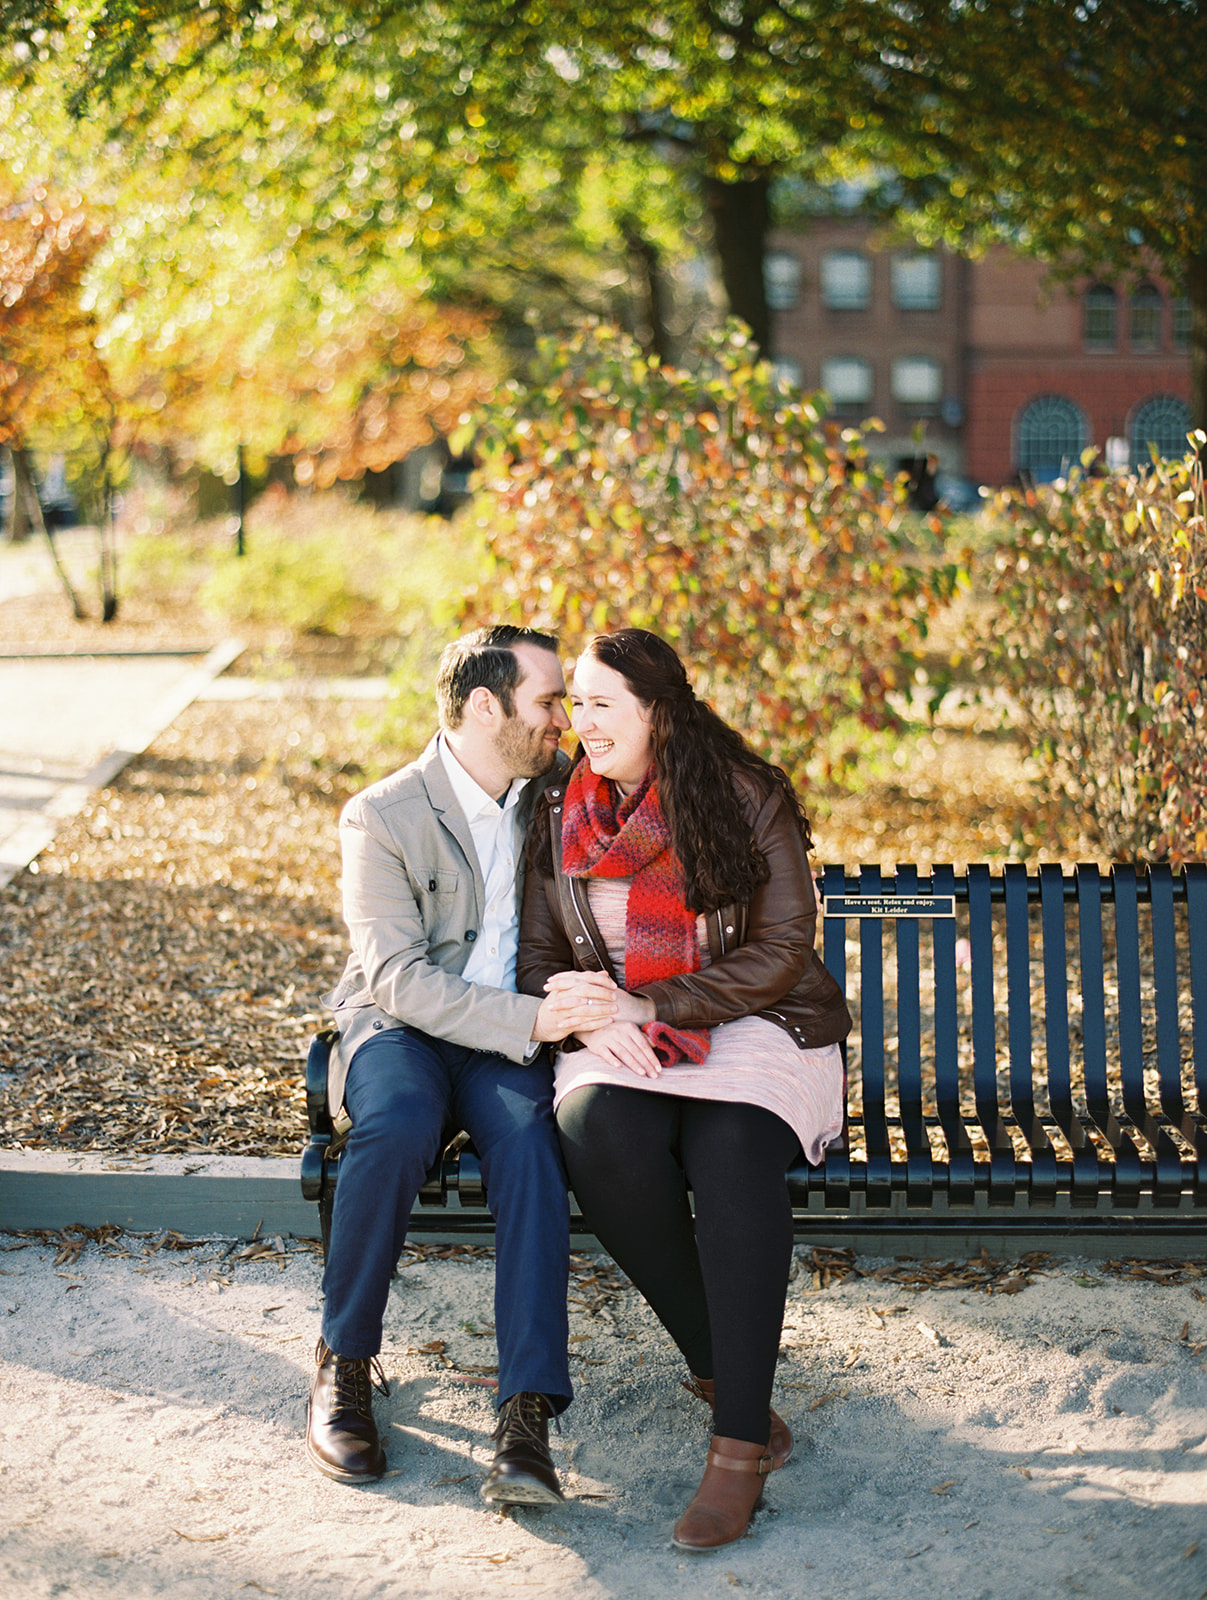 fall engagement alexandria virginia autumn engagement knitting engagement session red leaves autumn photoshoot bench